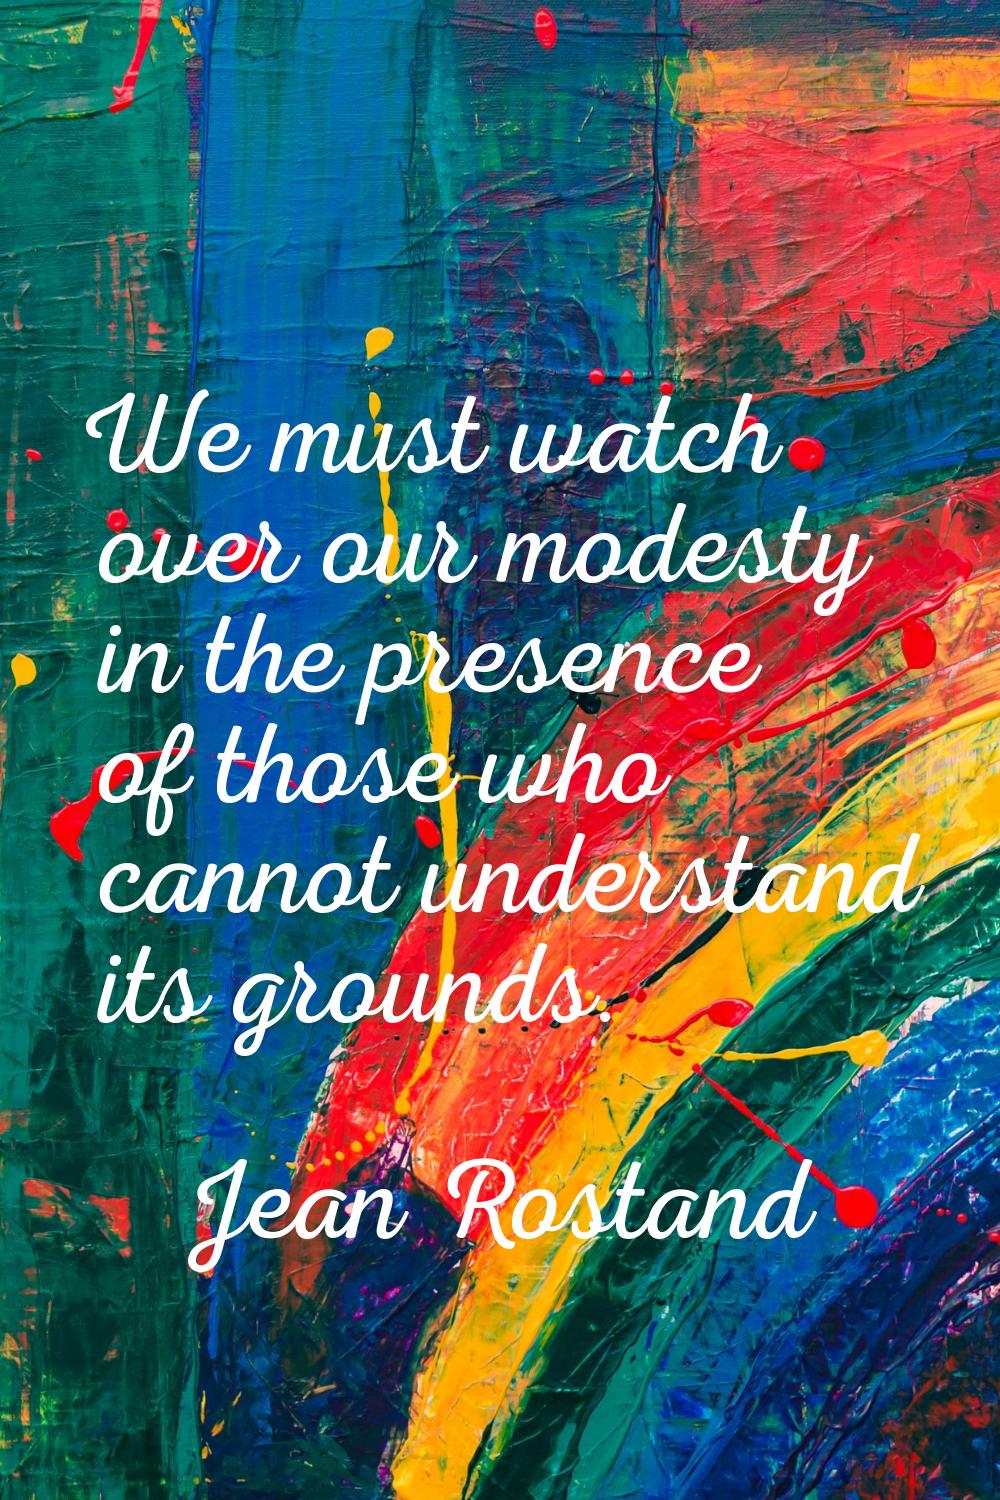 We must watch over our modesty in the presence of those who cannot understand its grounds.